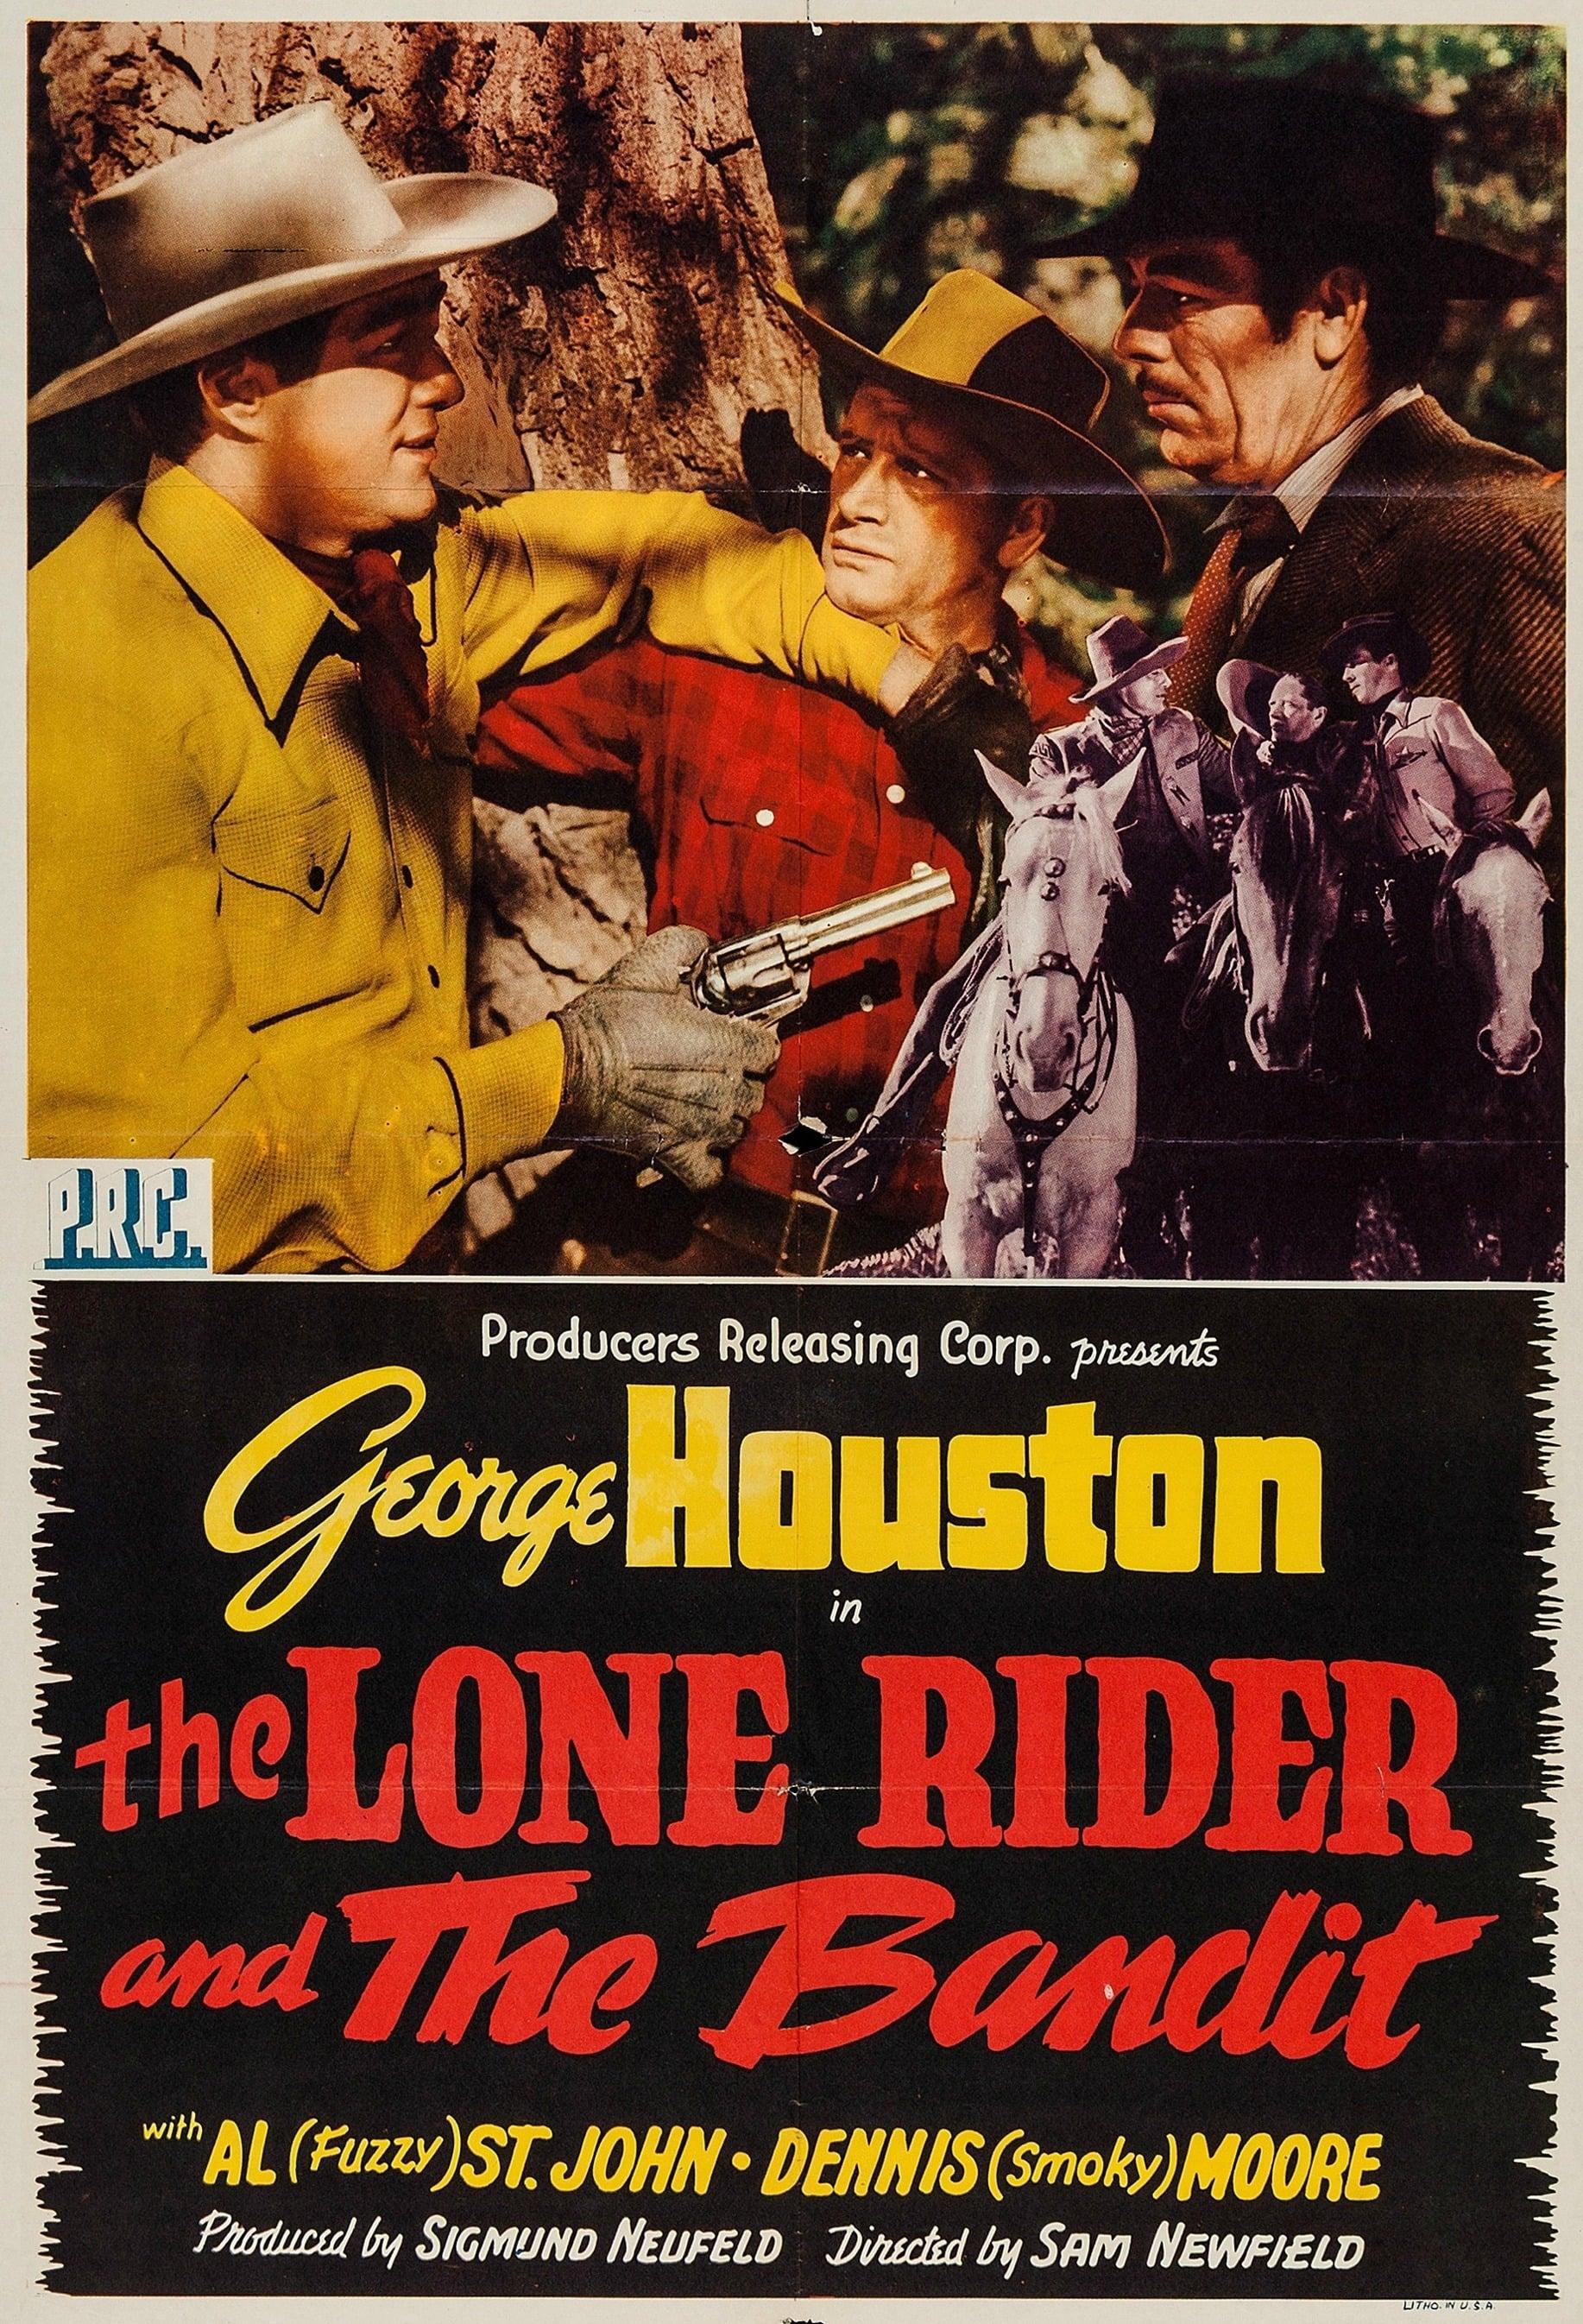 The Lone Rider and the Bandit poster